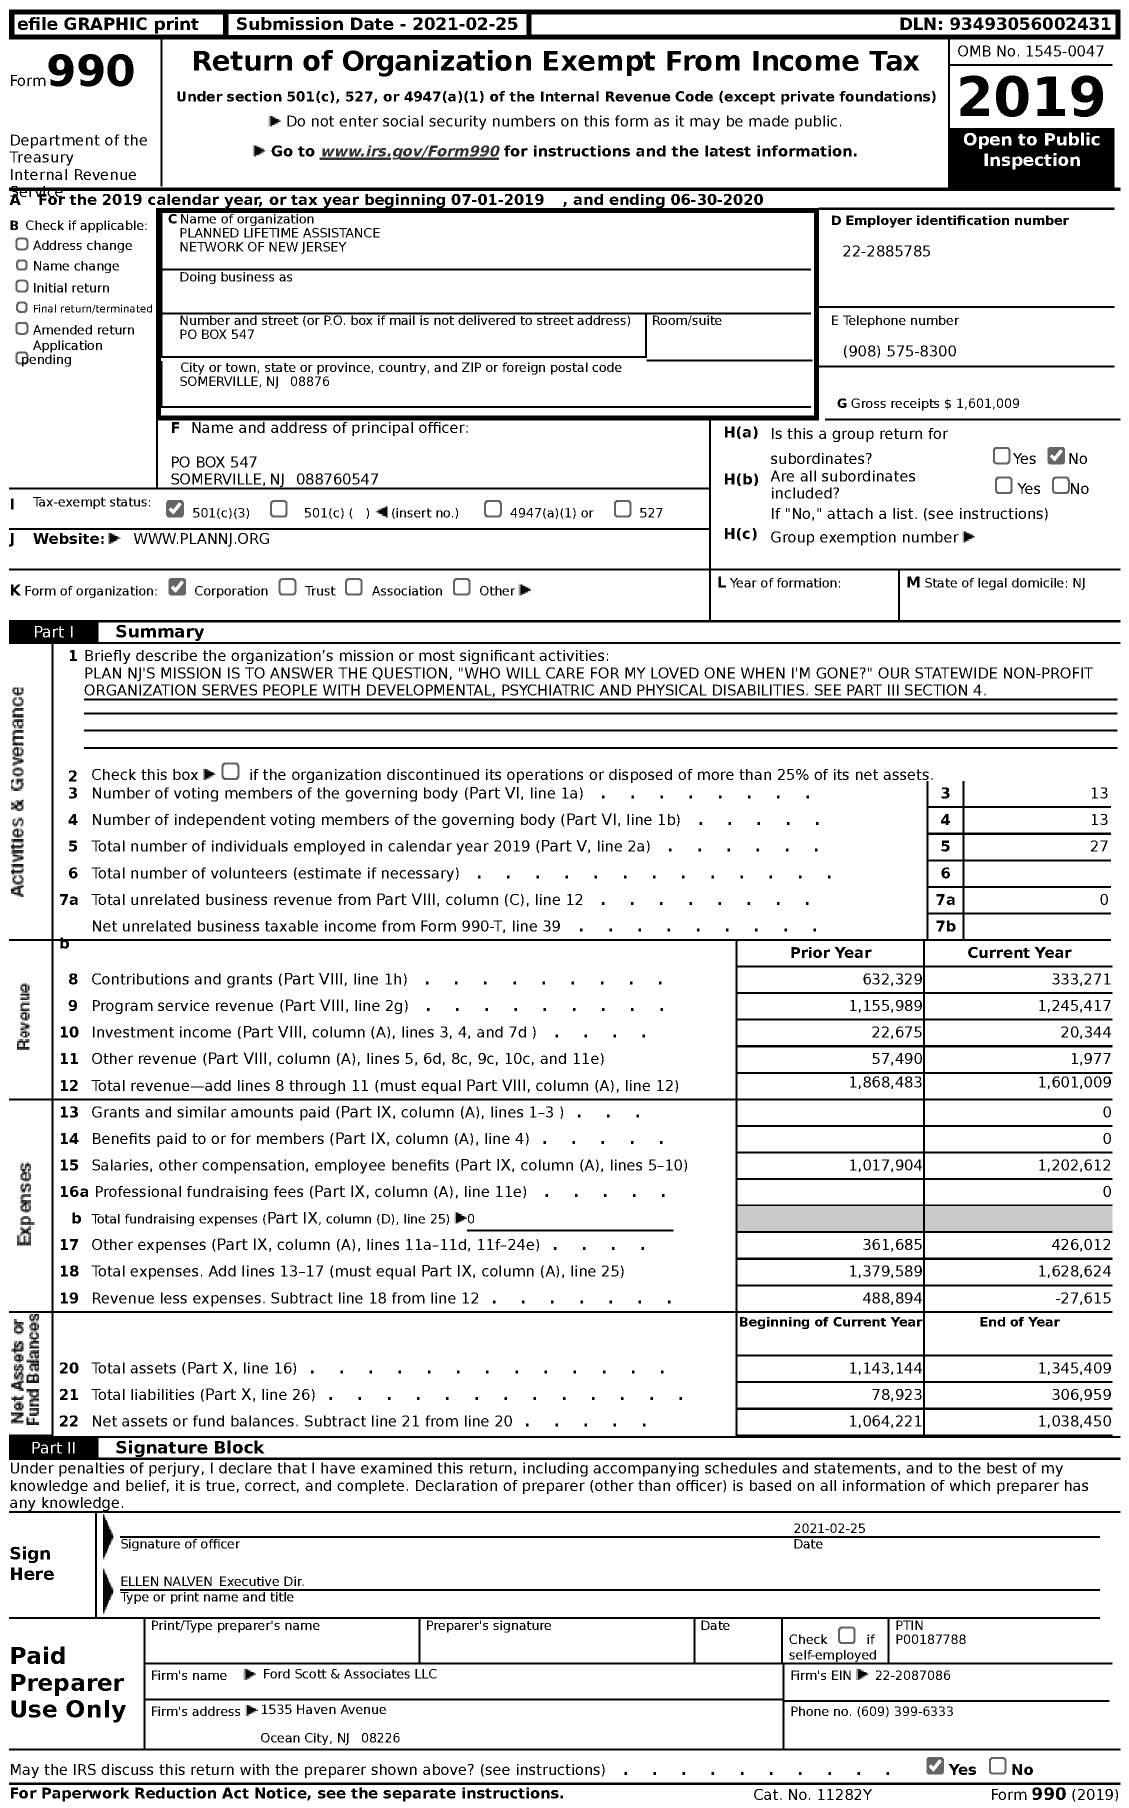 Image of first page of 2019 Form 990 for Planned Lifetime Assistance Network of New Jersey